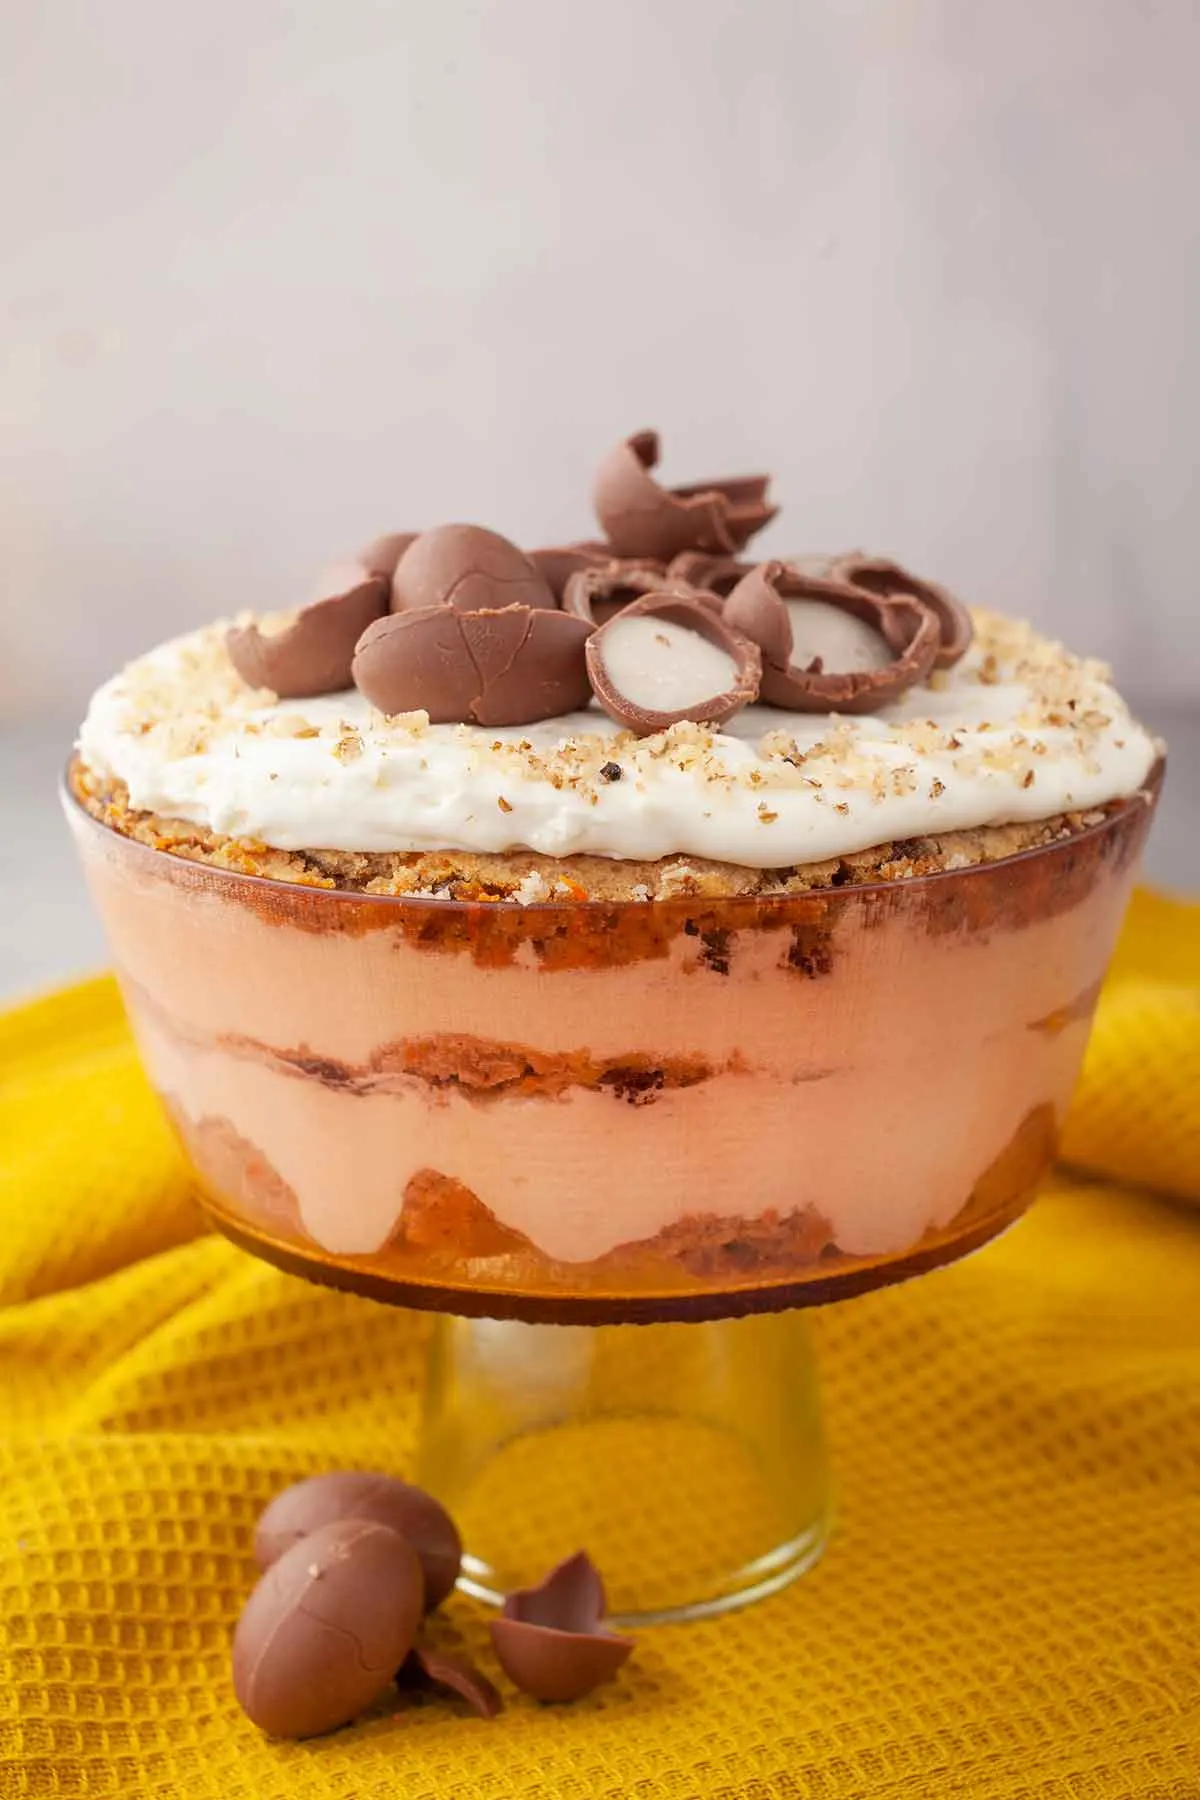 Easter Trifle with Carrot Cake Flavor and Chocolate Eggs